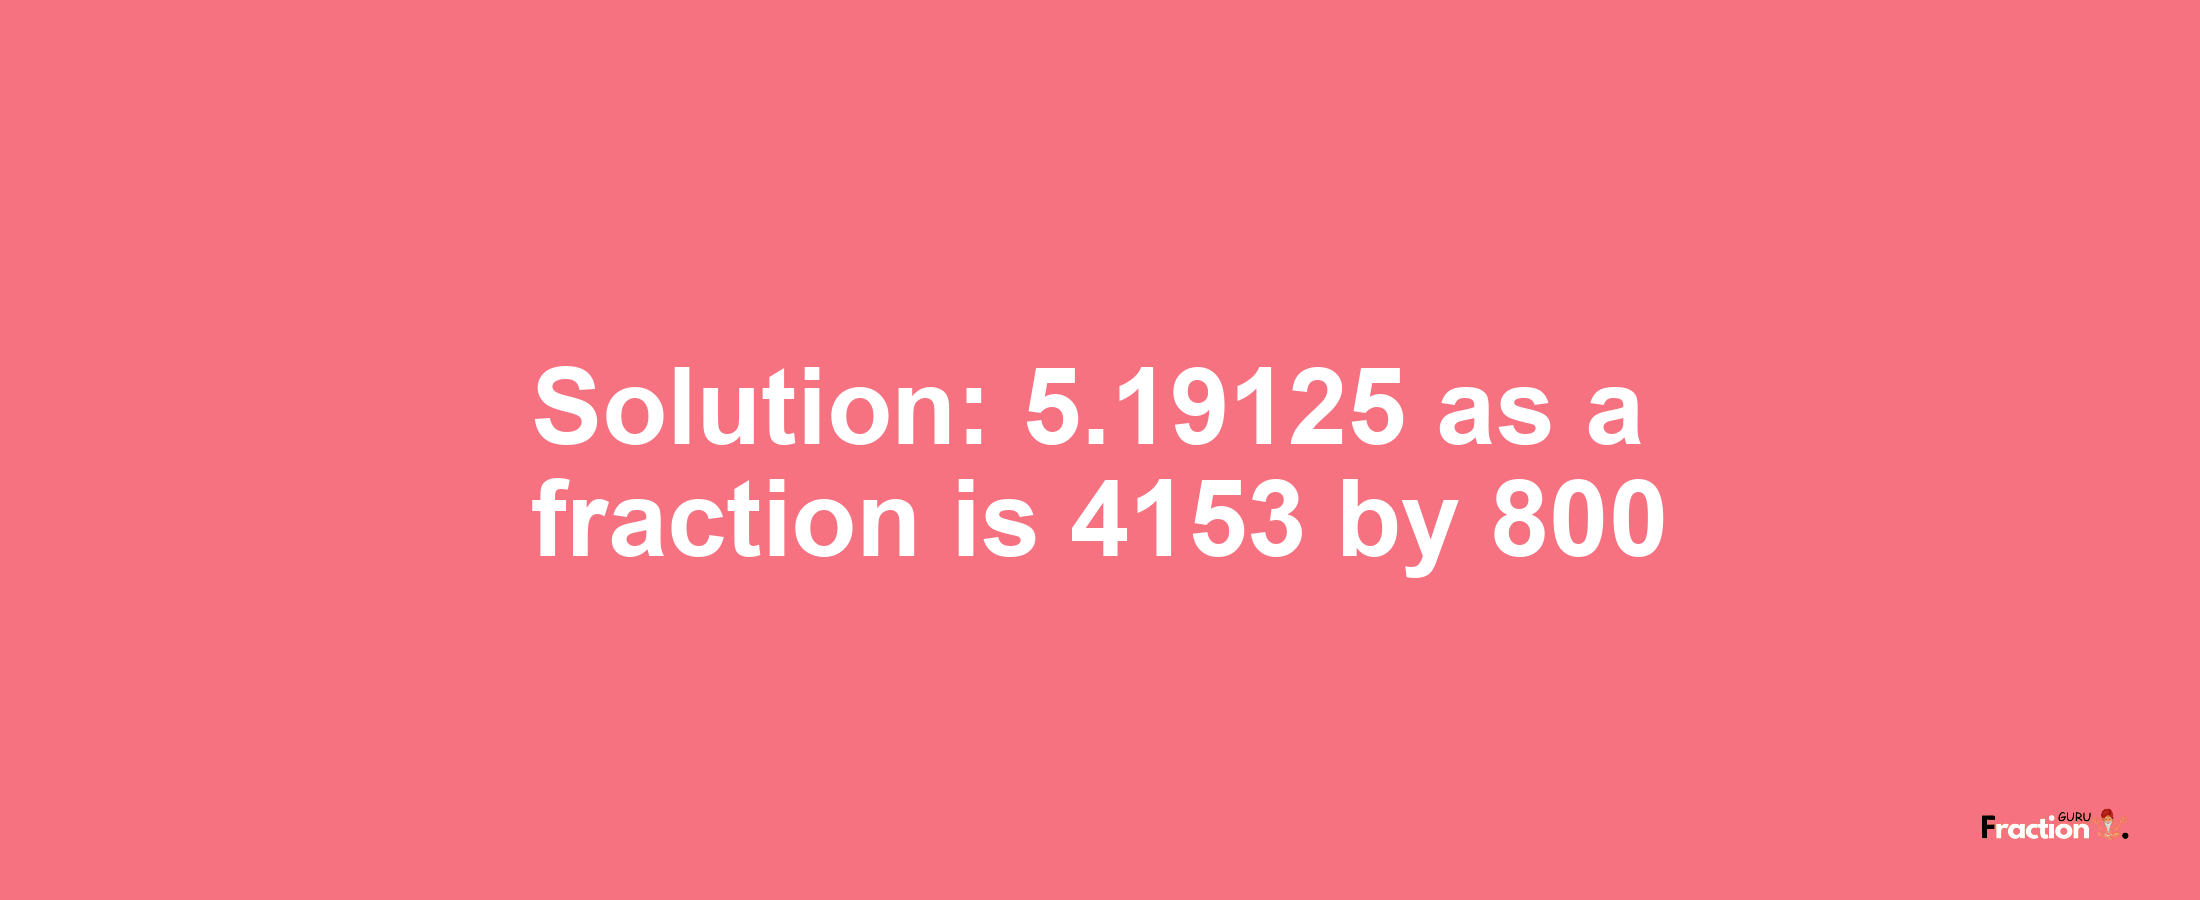 Solution:5.19125 as a fraction is 4153/800